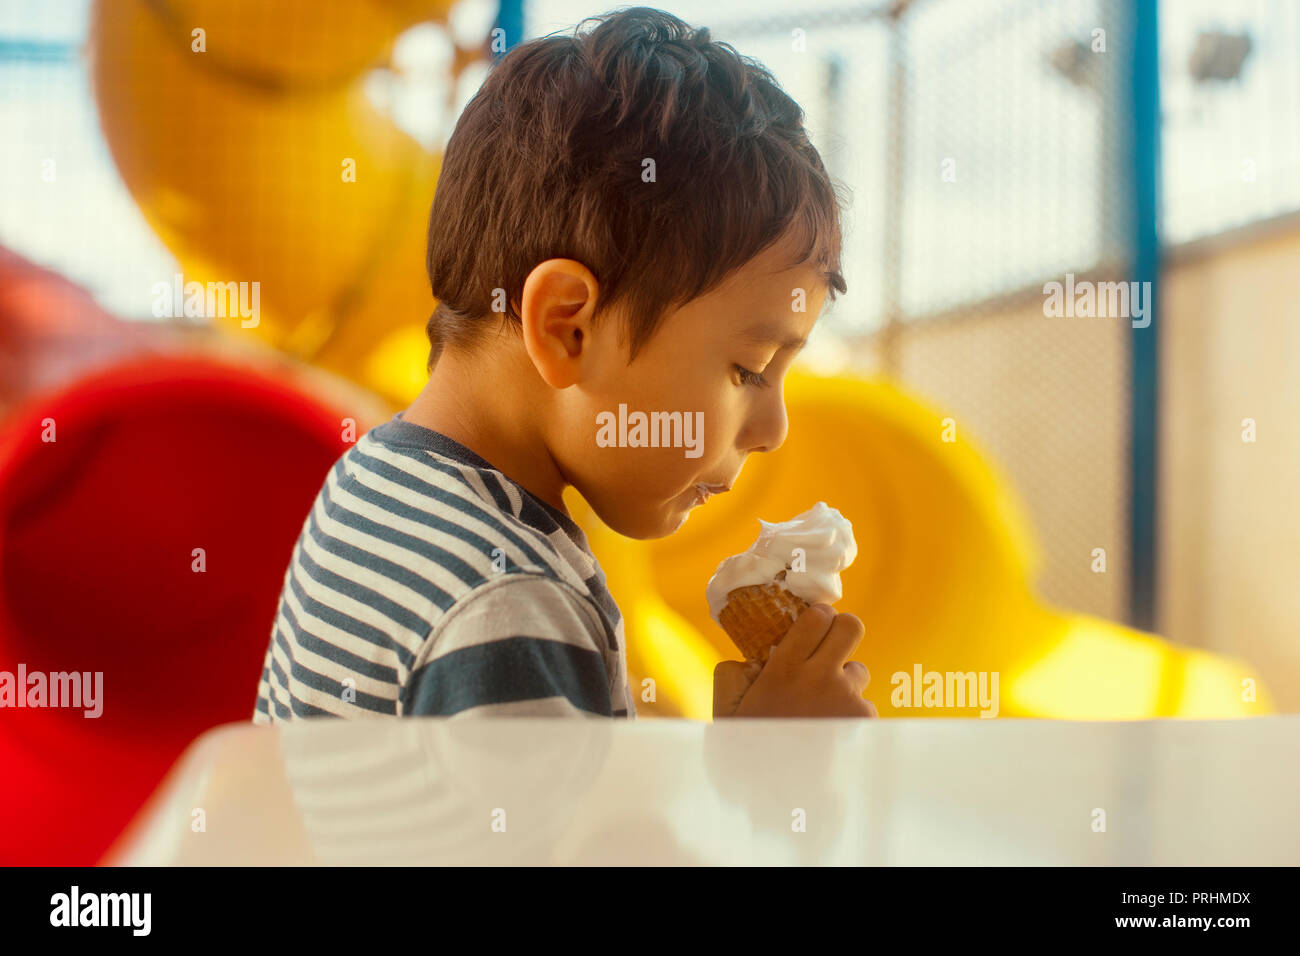 Boy eating a scoop of ice cream in the playground Stock Photo